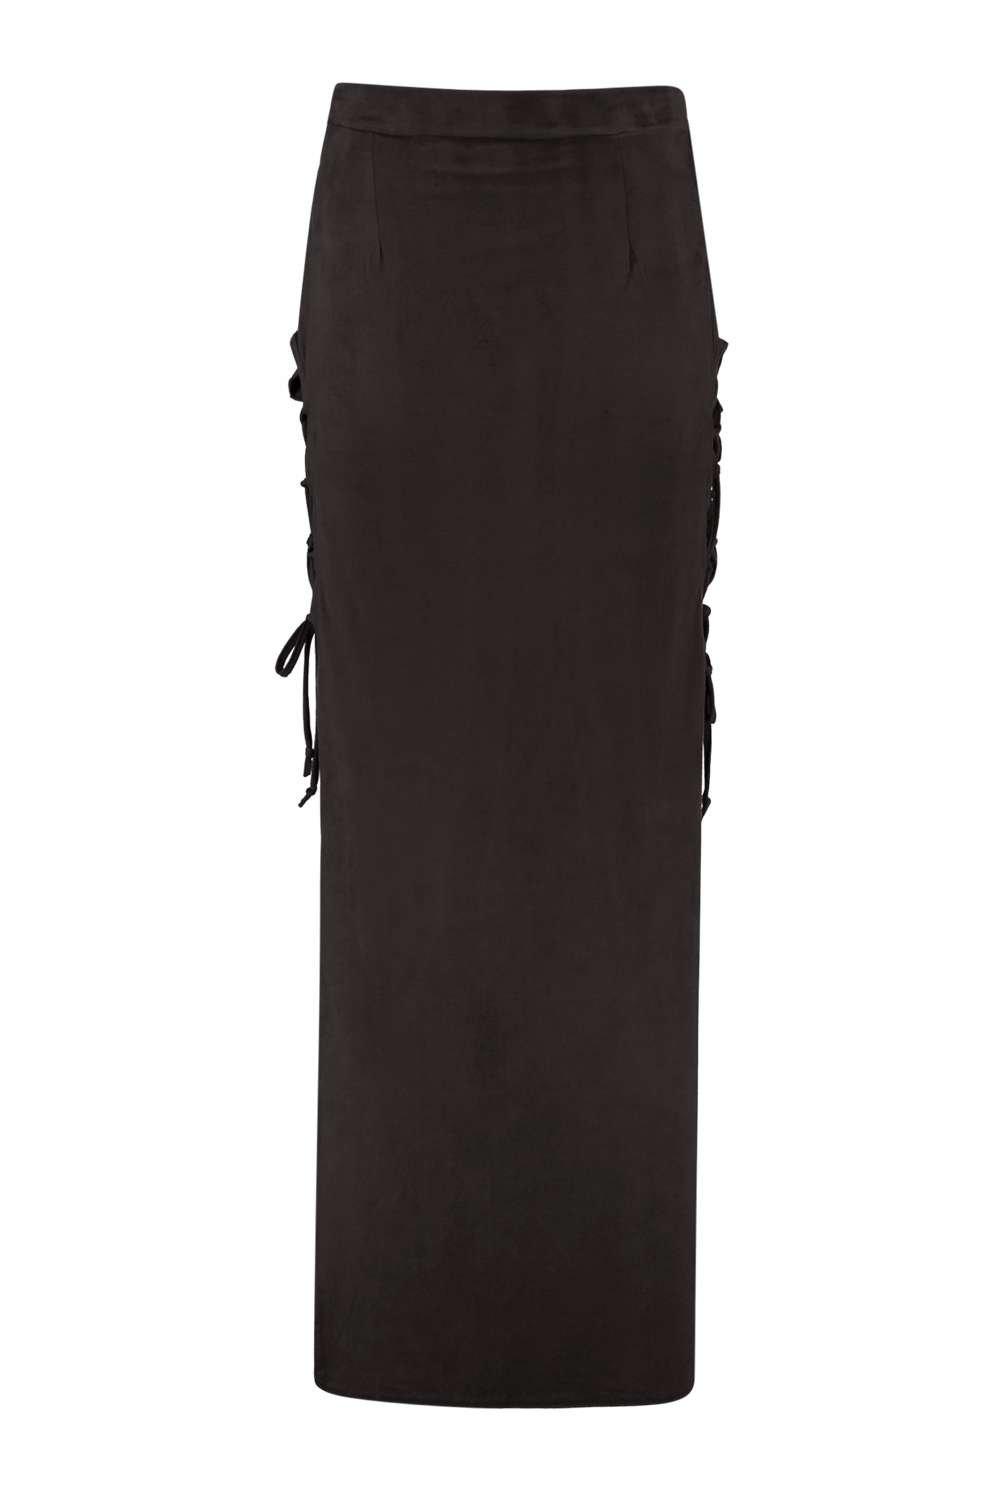 Boohoo Womens Alandria Lace Up Side Suedette Maxi Skirt | eBay